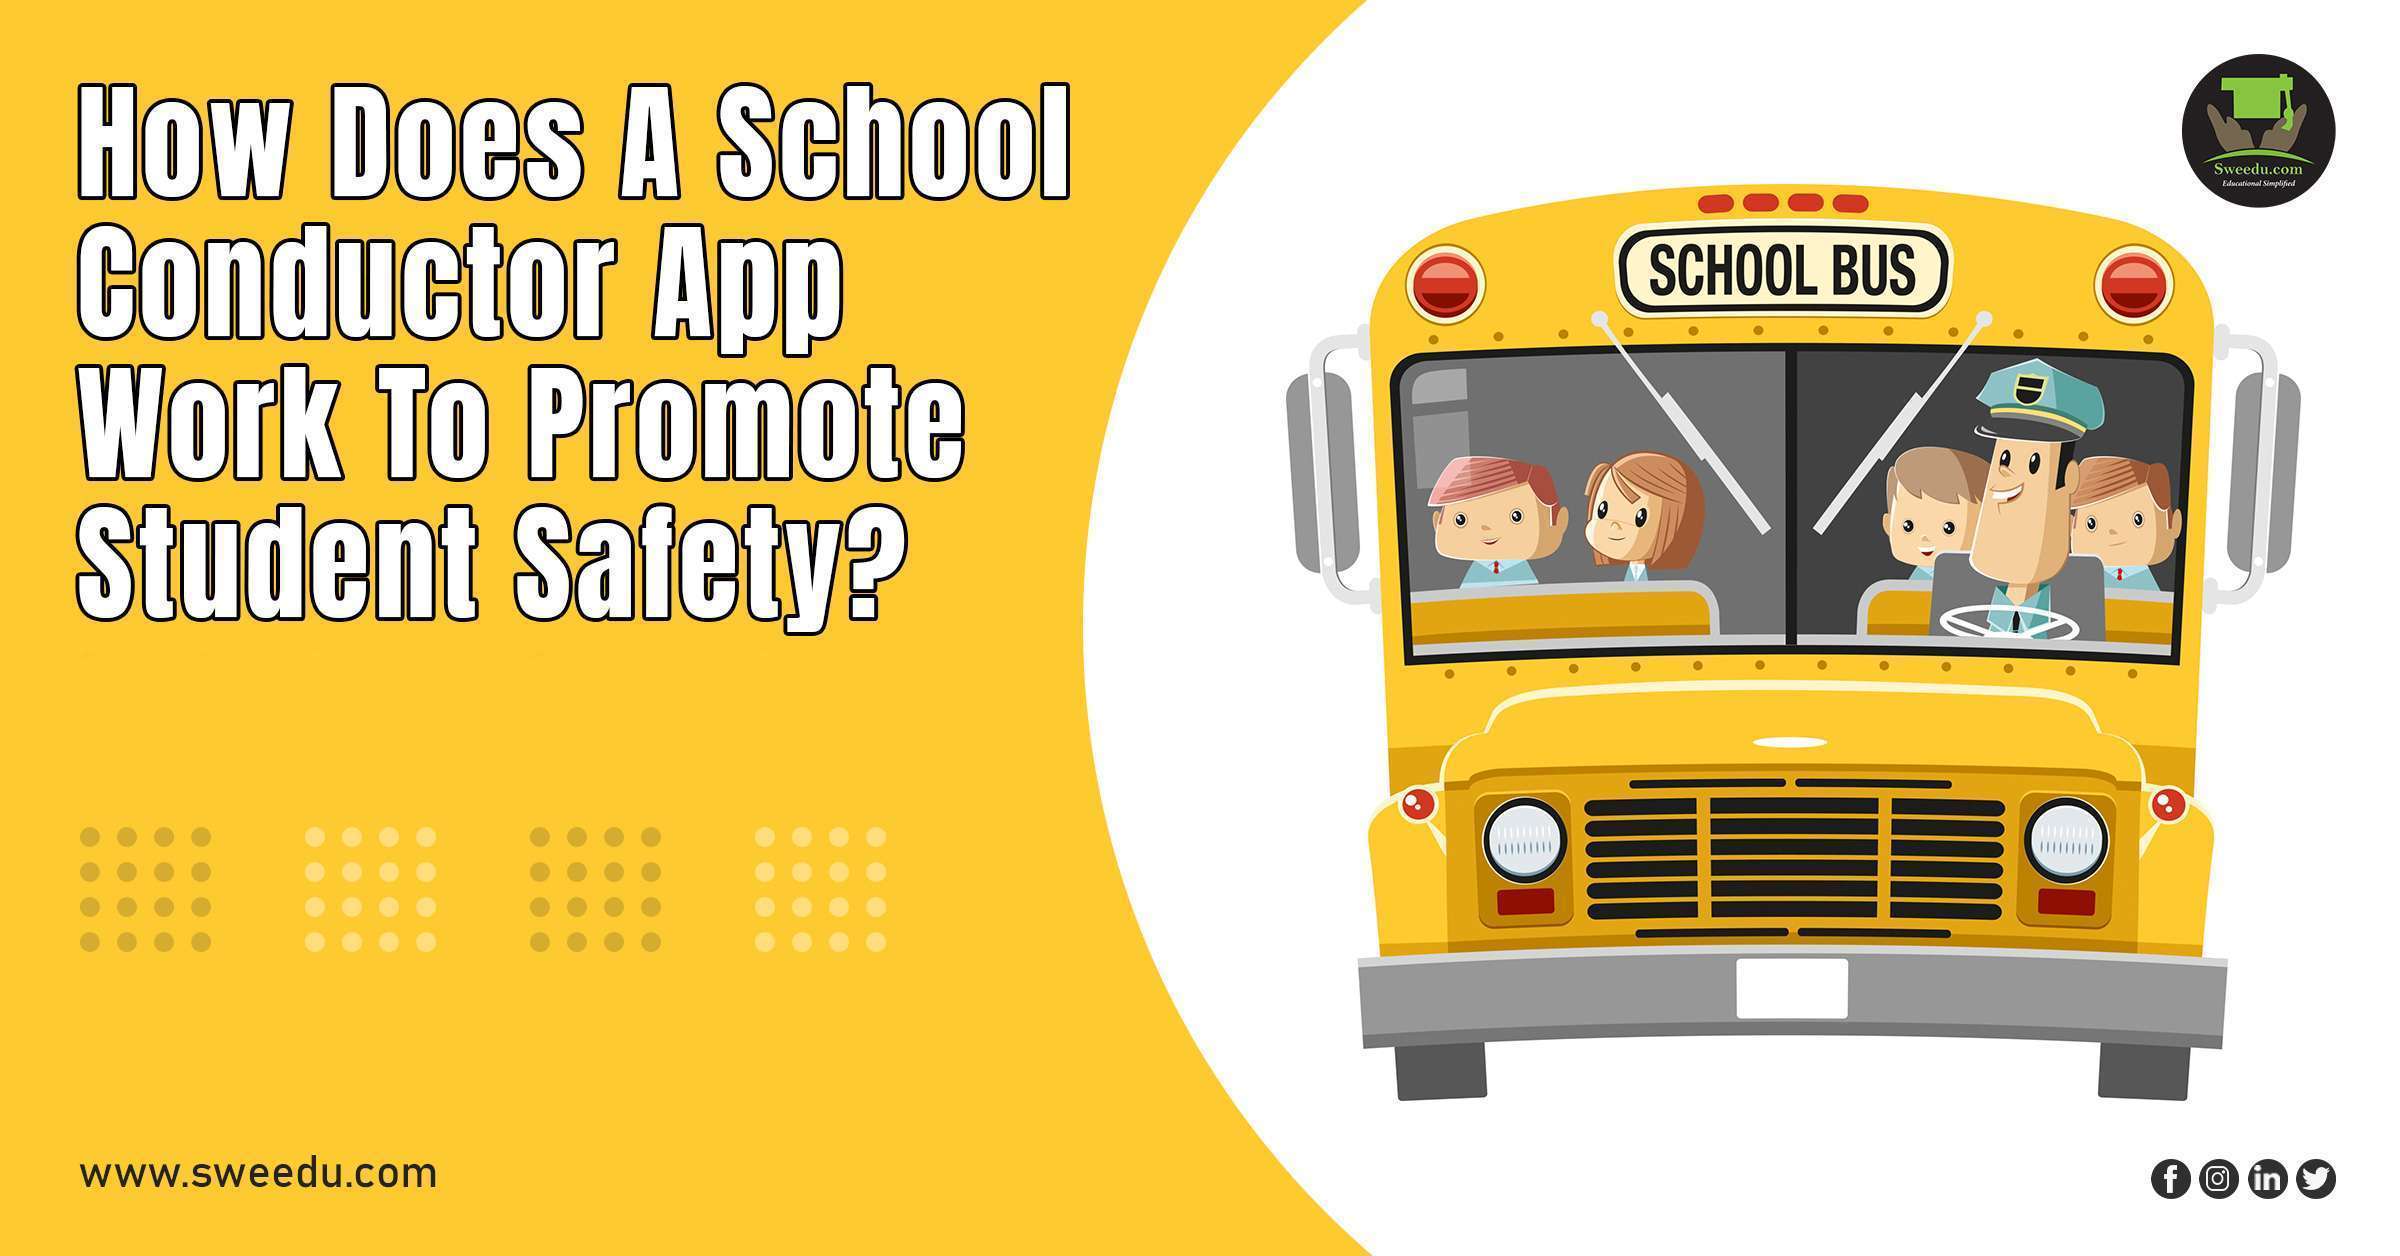 School Conductor App for Student Safety - Sweedu